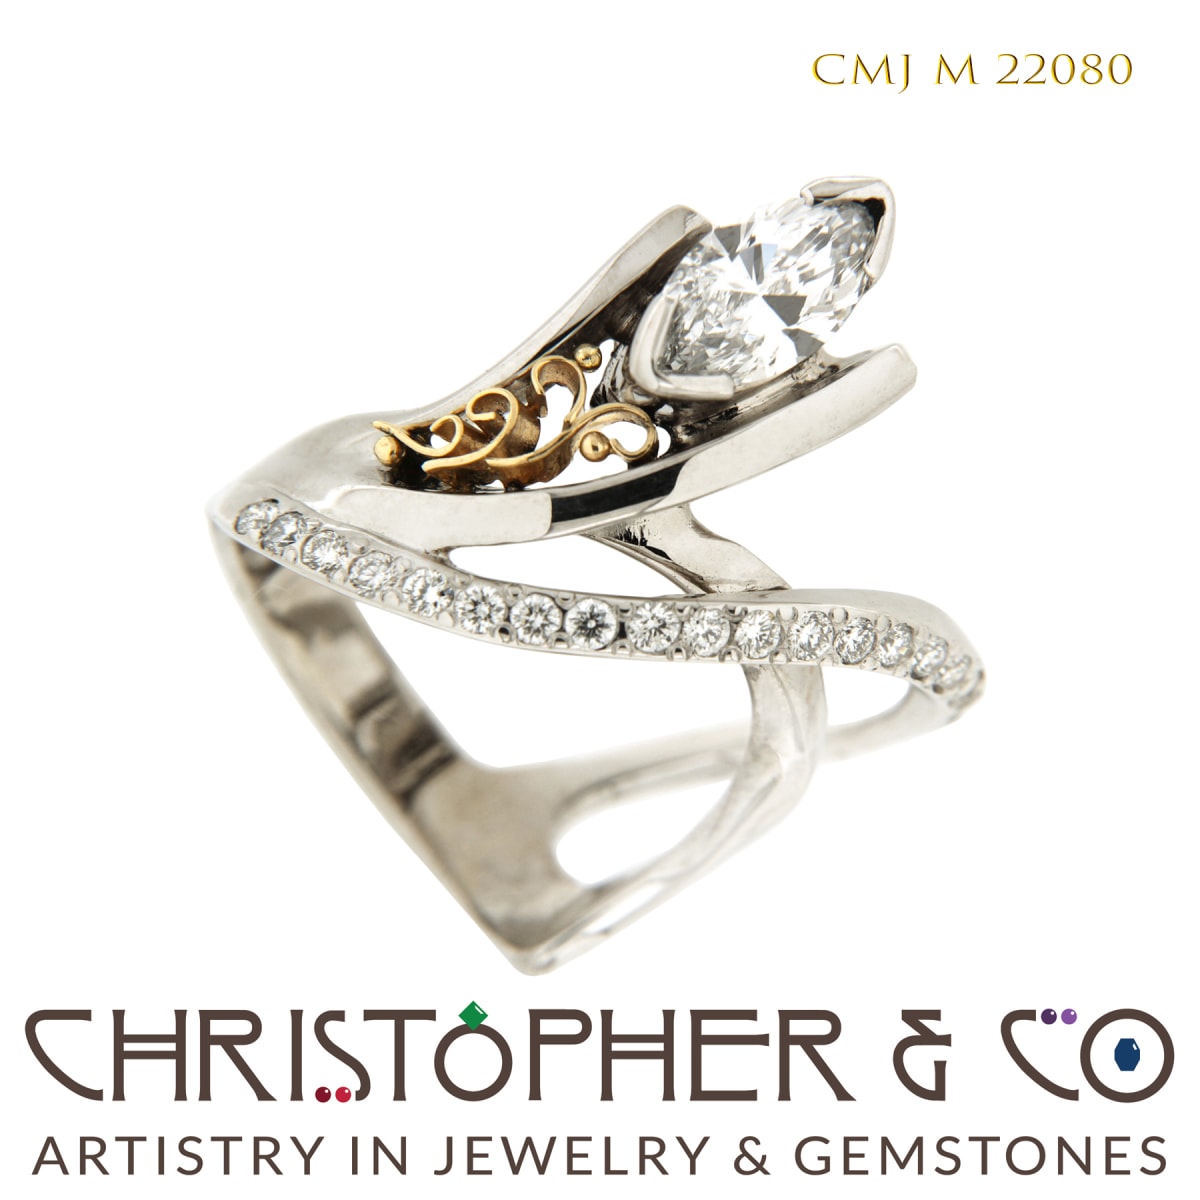 CMJ M 22080 Yellow & white gold ring designed by Christopher M. Jupp and set with diamonds. by Christopher M. Jupp  Image: CMJ M 22080 Yellow & white gold ring designed by Christopher M. Jupp and set with diamonds.